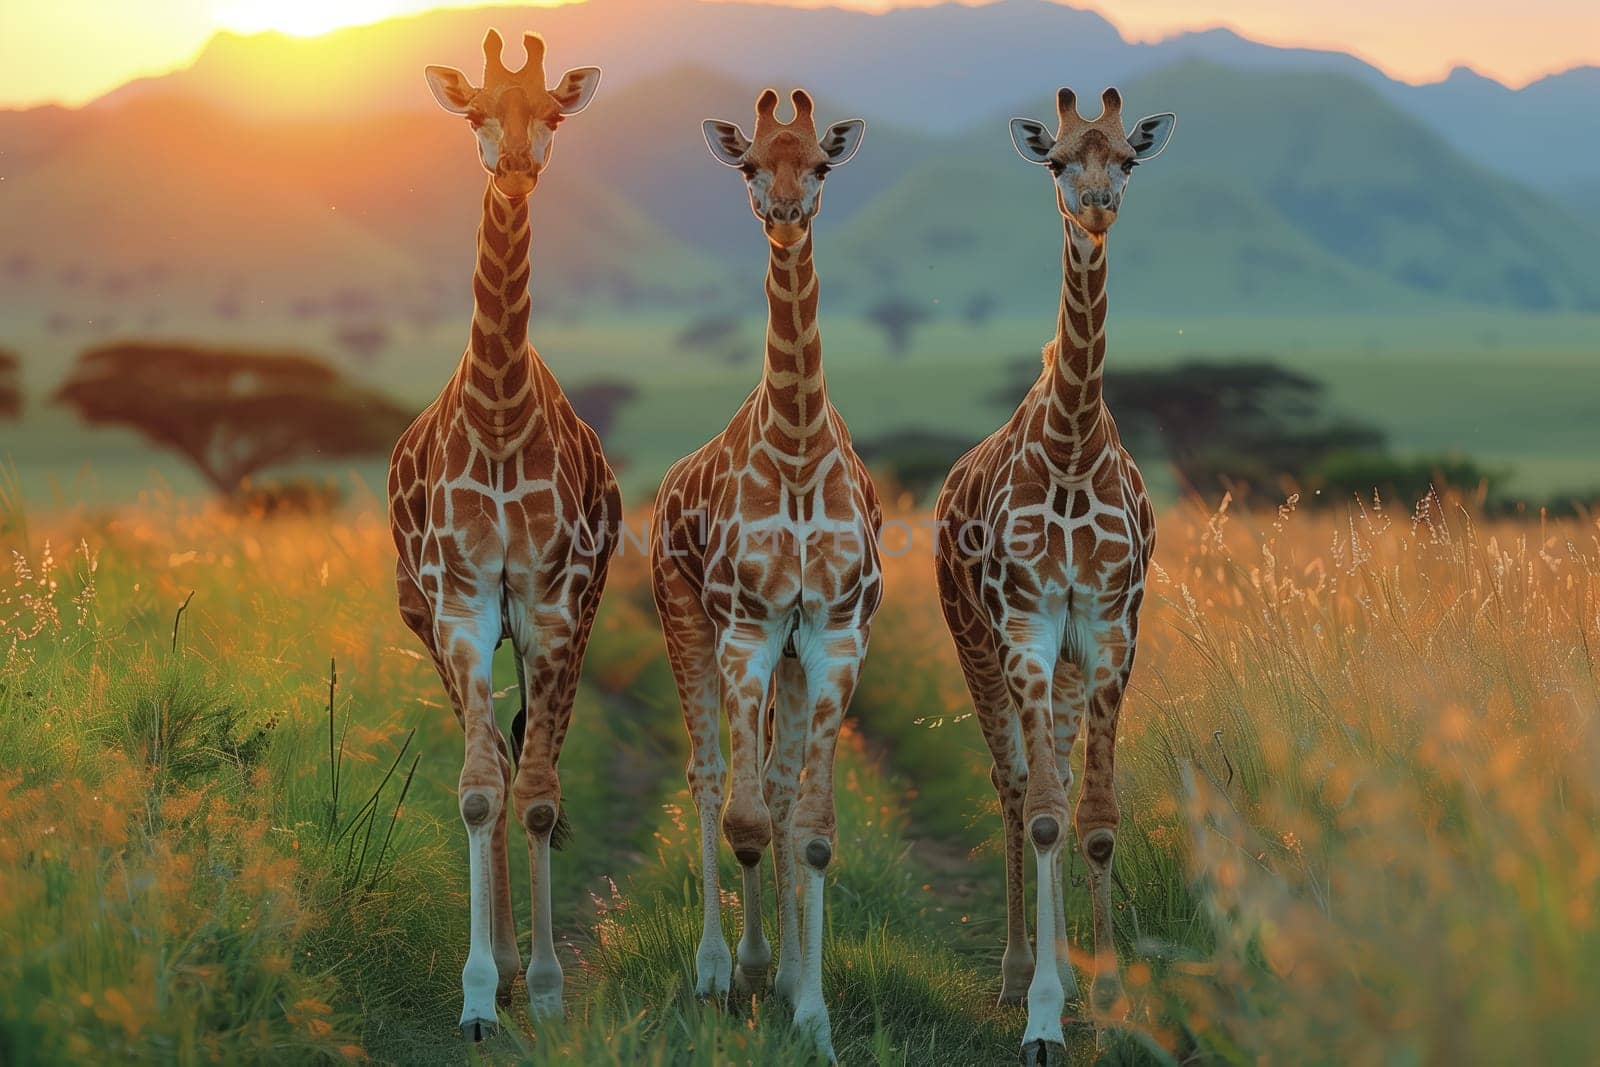 Three Giraffes roam the grassy field at sunset, under a colorful sky by richwolf